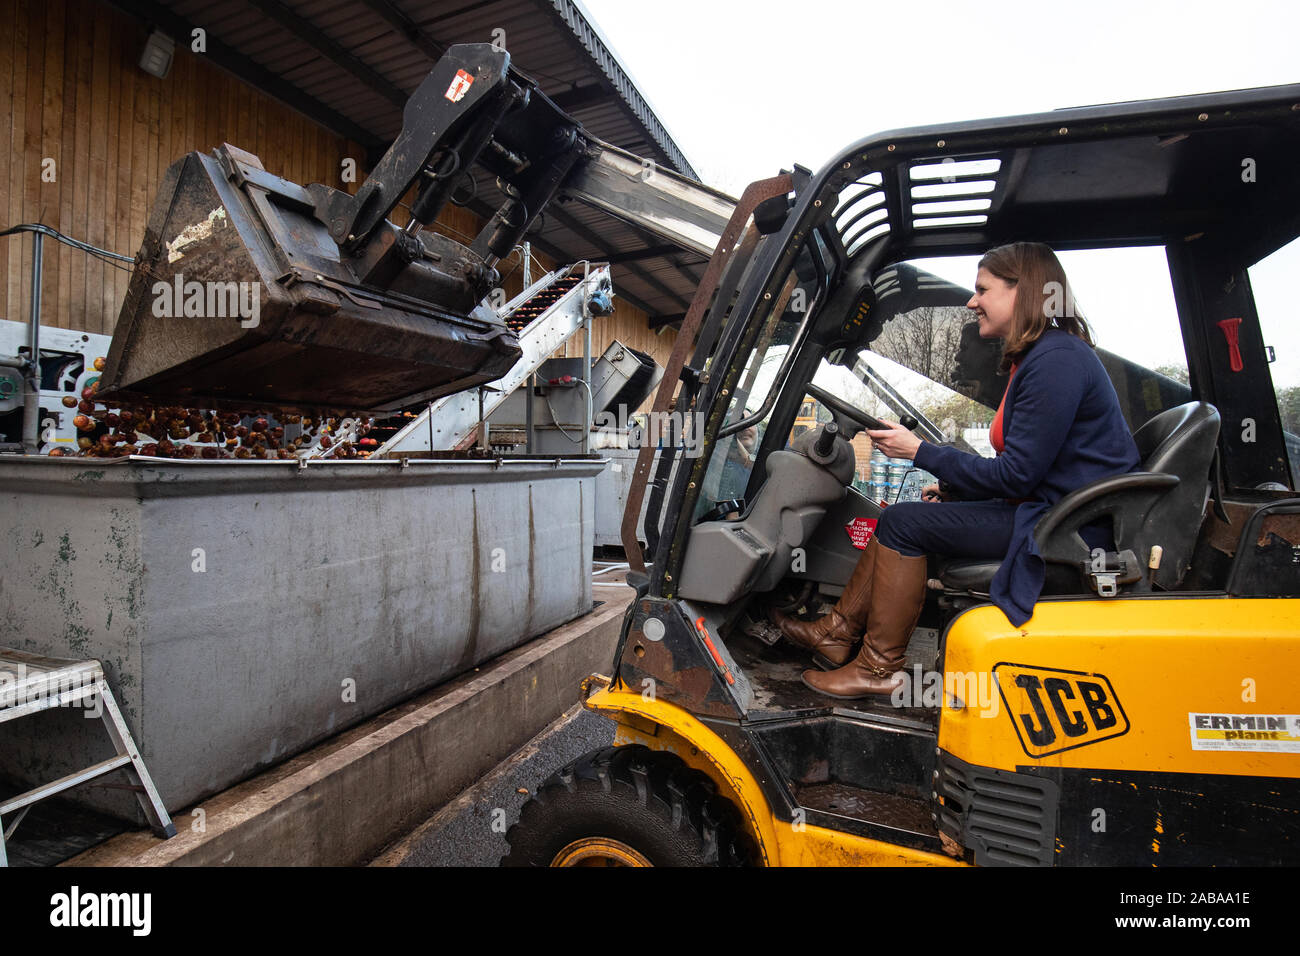 Liberal Democrat leader Jo Swinson drives a JCB during a visit to Dunkertons Cider Company, an organic and plastic free brewery in Cheltenham, Gloucestershire, during campaigning for the General Election. Stock Photo